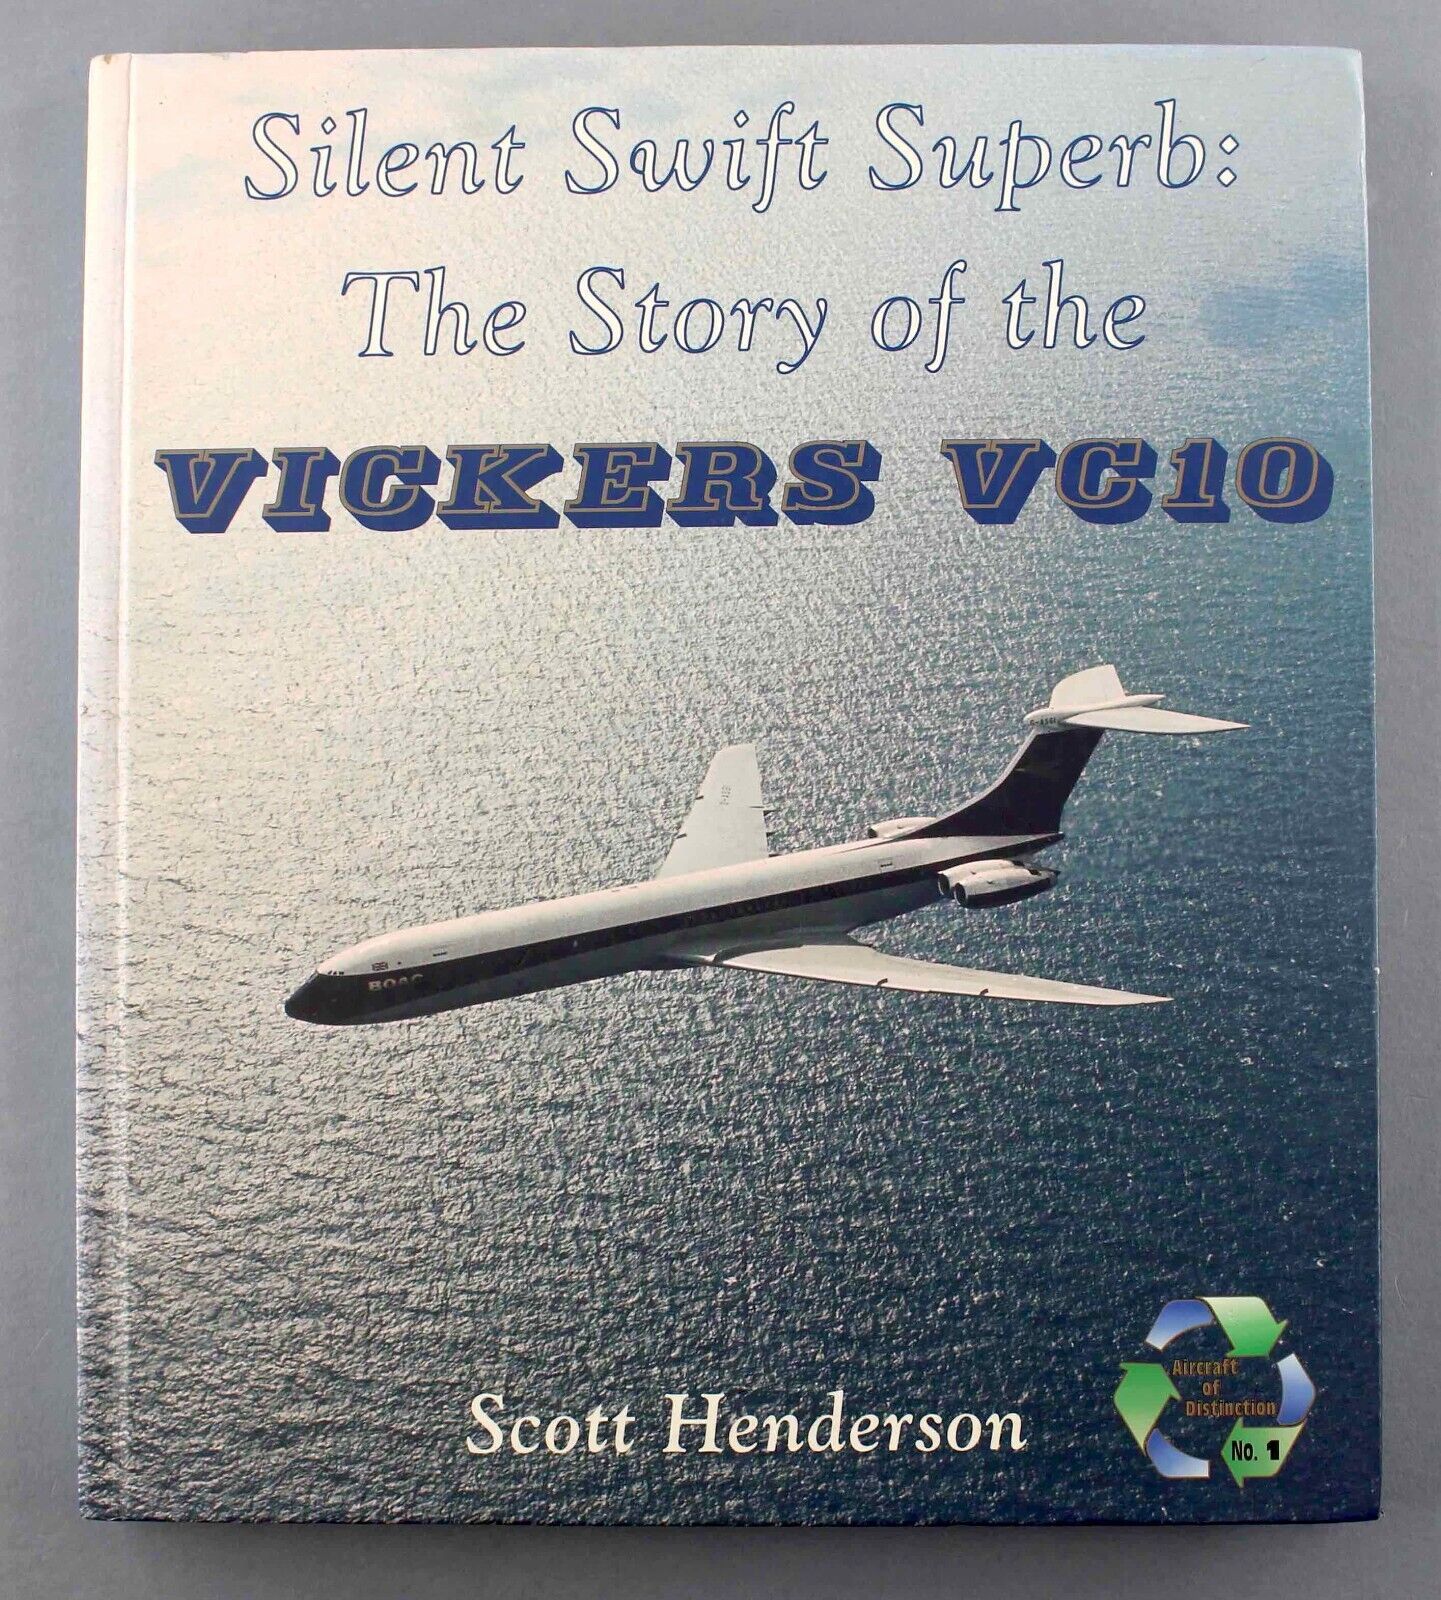 STUNNING VICKERS VC10 BOOK SILENT SWIFT SUPERB AMAZING COLOUR PICTURES BOAC BUA 